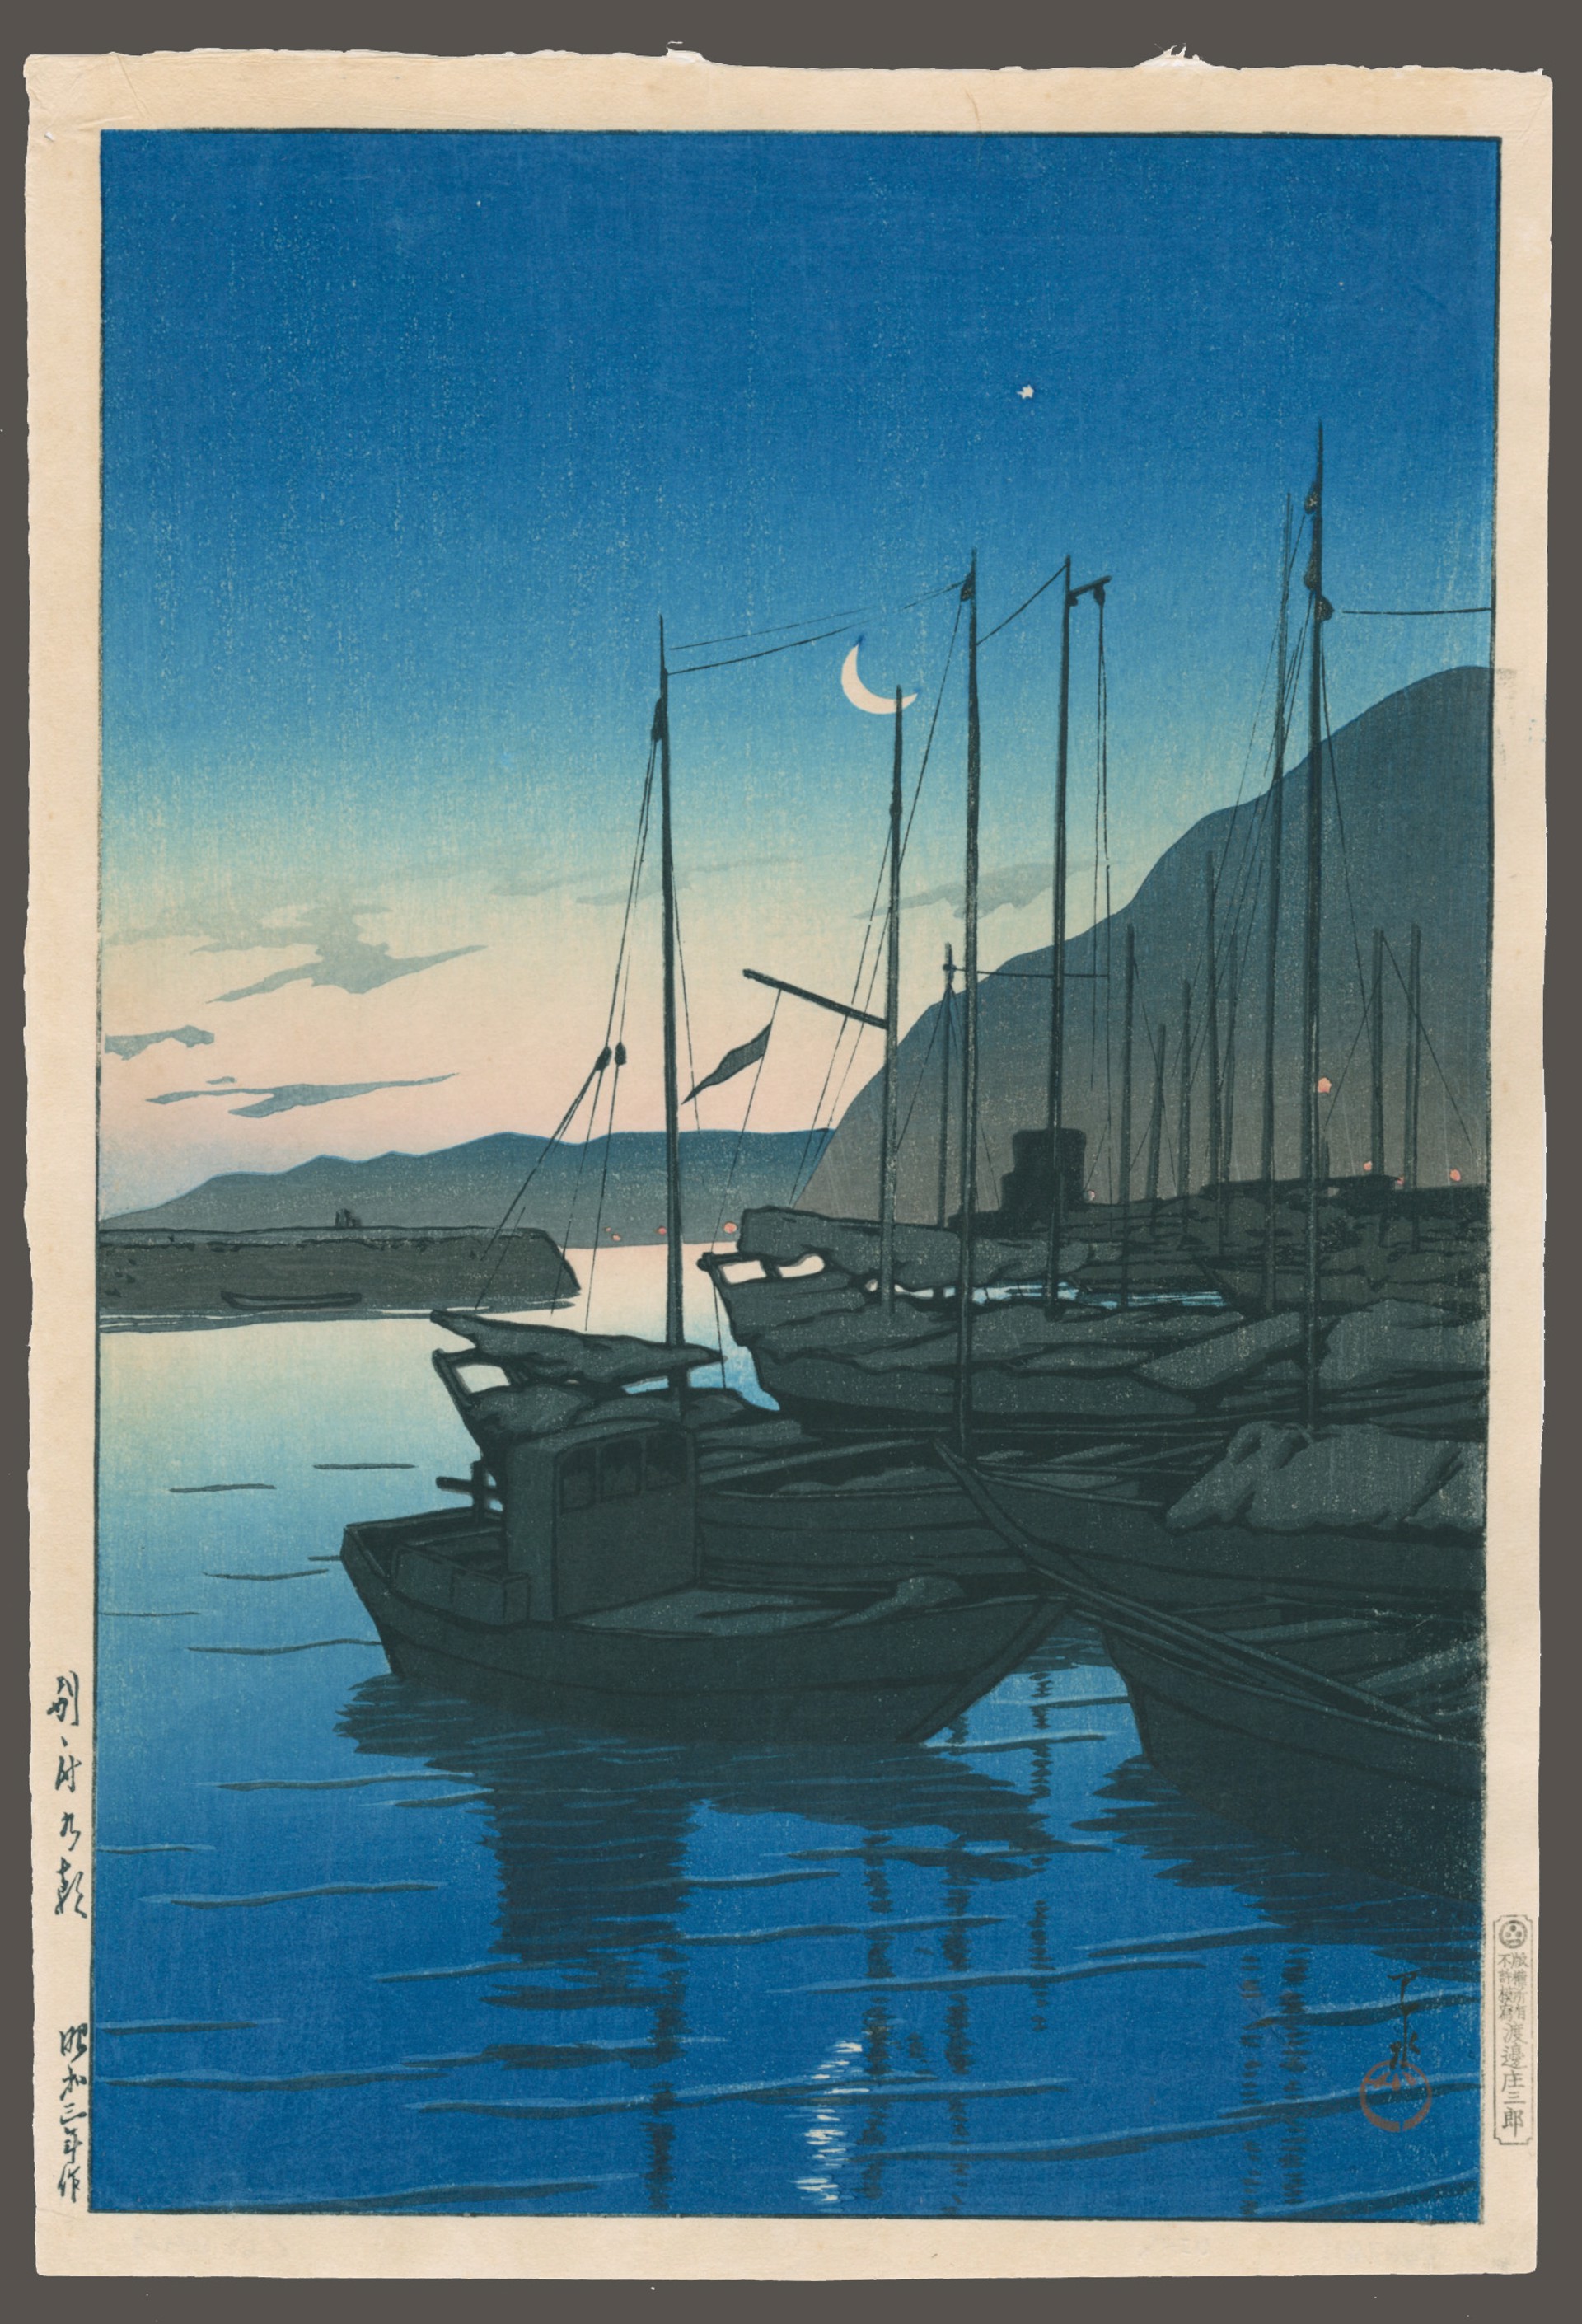 Morning in Beppu, Oita Souvenirs of Travel - 3rd series by Hasui